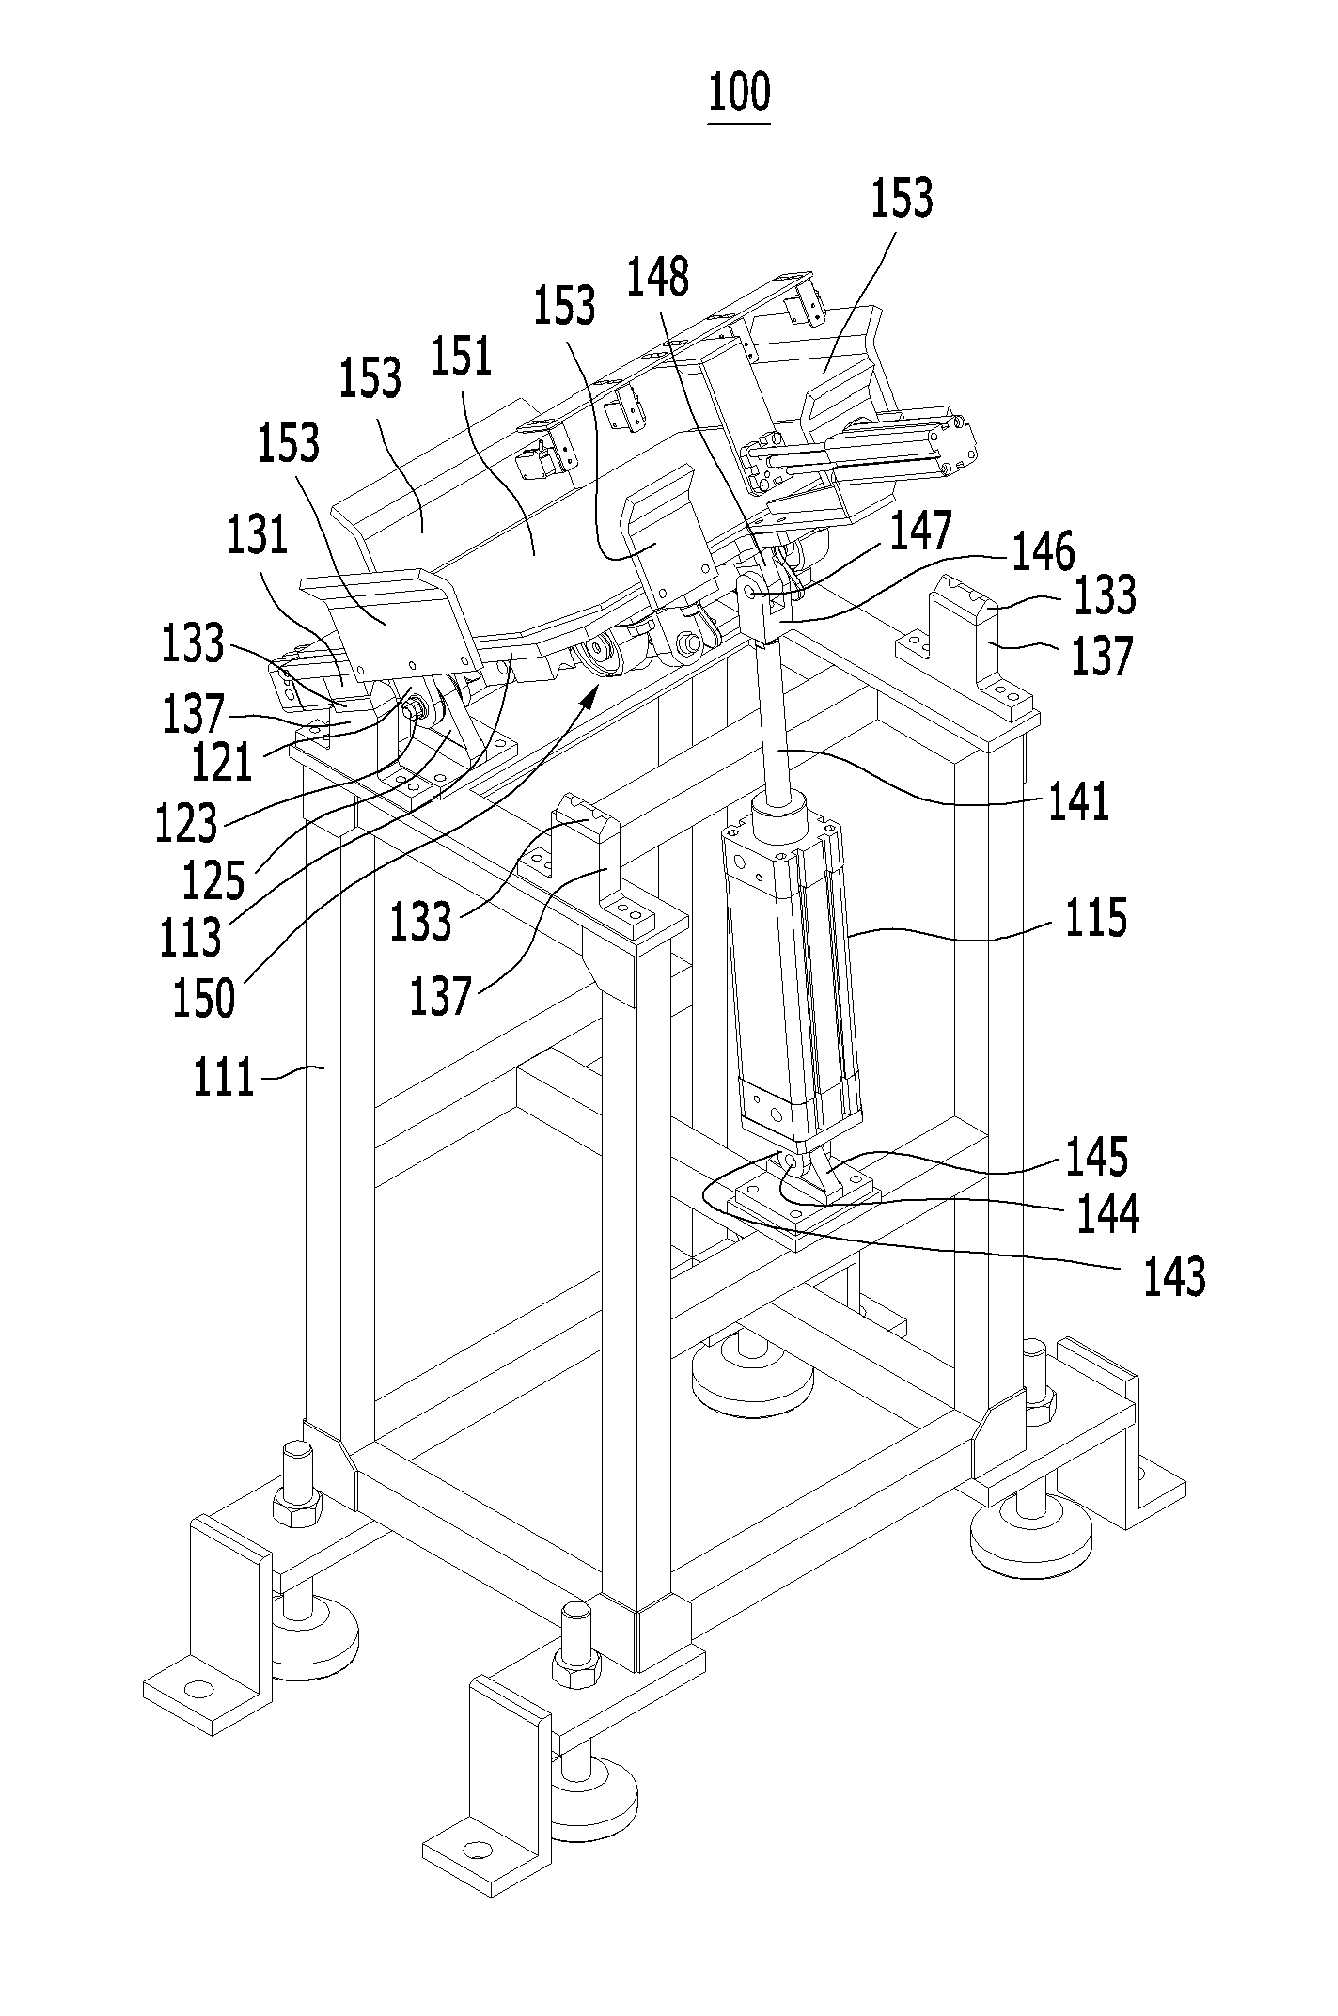 Device for aligning door hinge of automatic system for mounting door hinge to vehicle